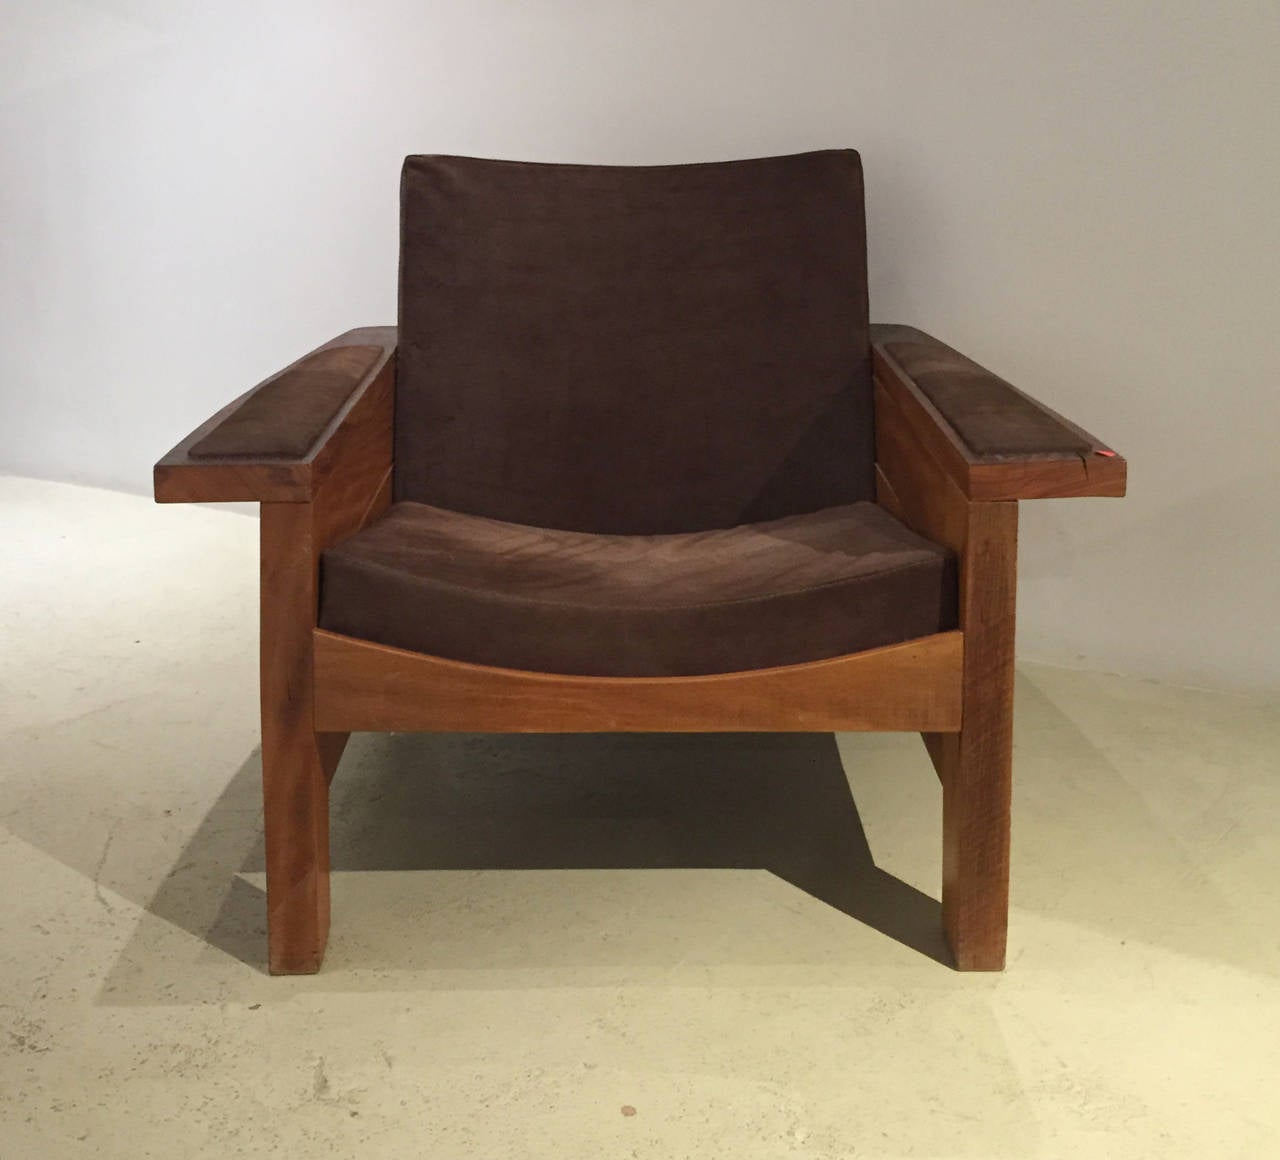 'Braz' armchair by Carlos Motta.
Made of reclaimed Peroba rosa with a wax finish. Rustic brown leather.